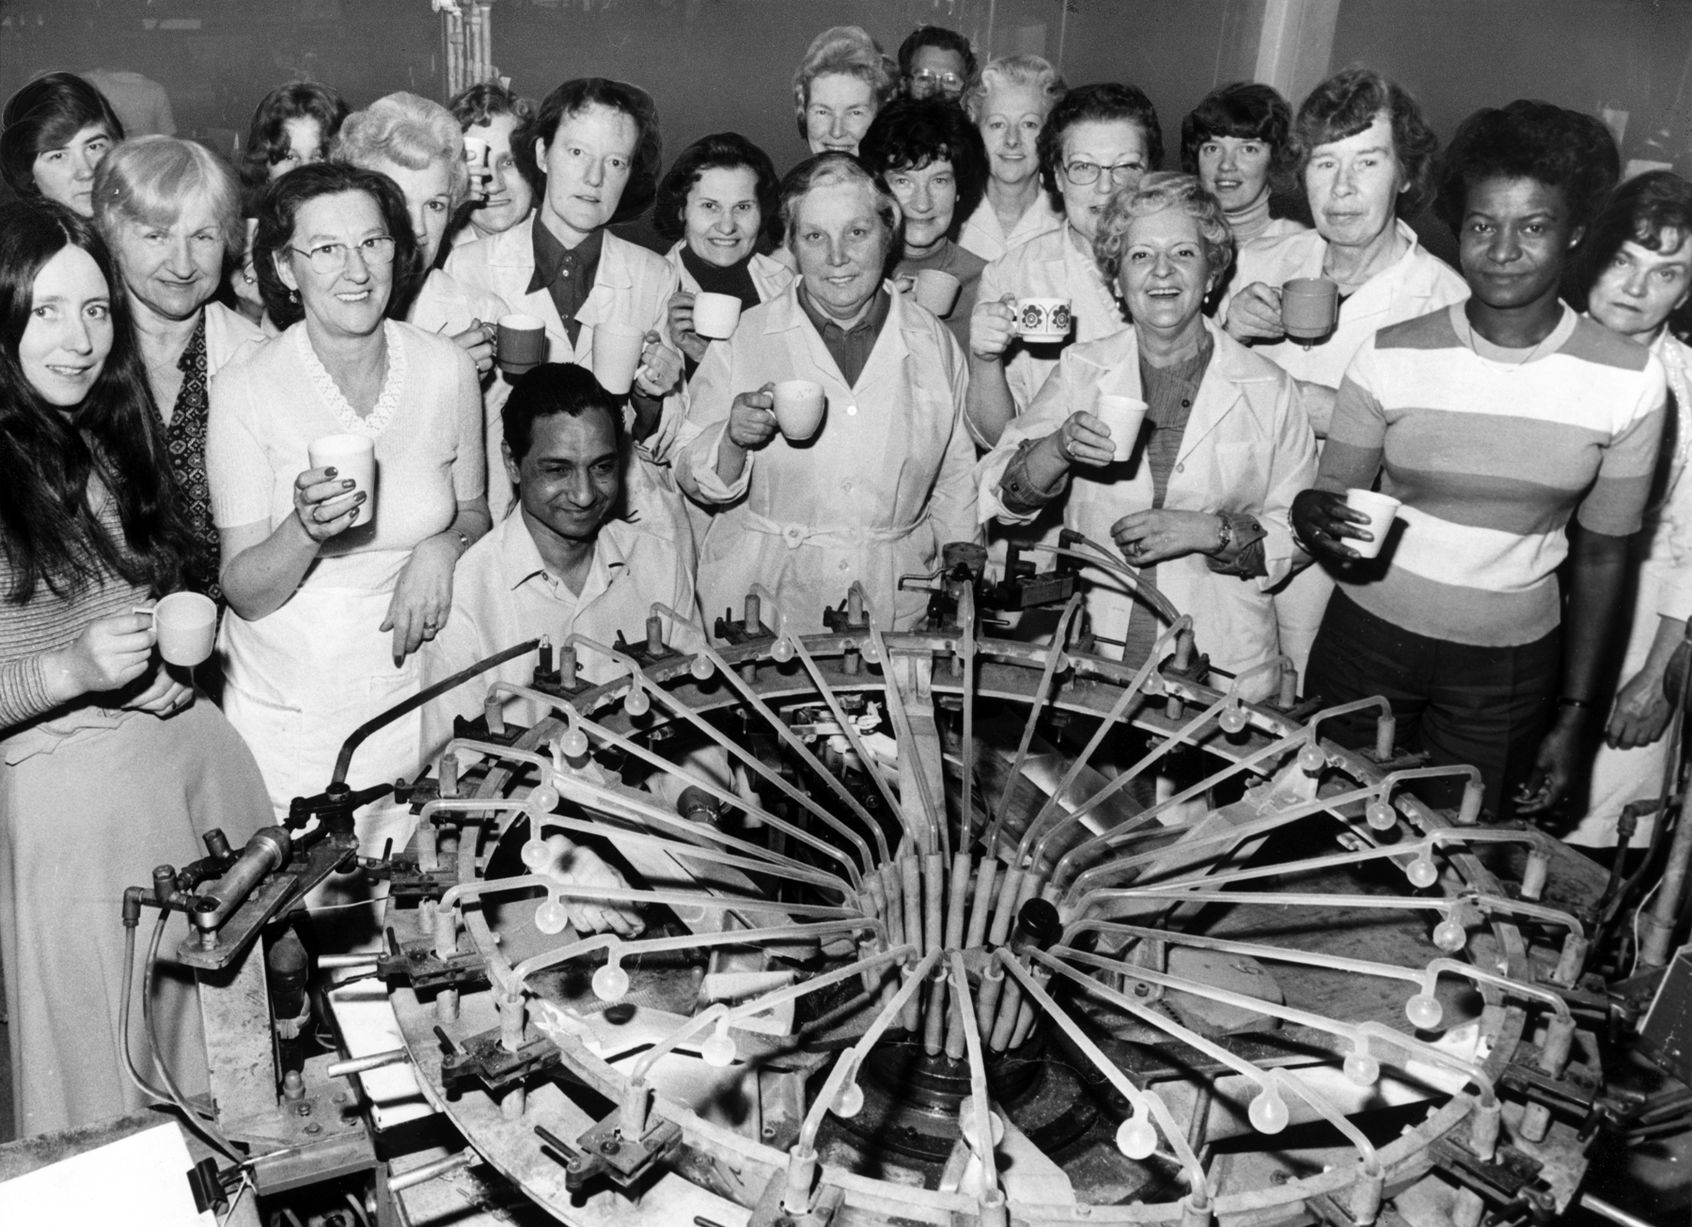 Workers at Thorn Lighting, 1979: credit Leicester Mercury